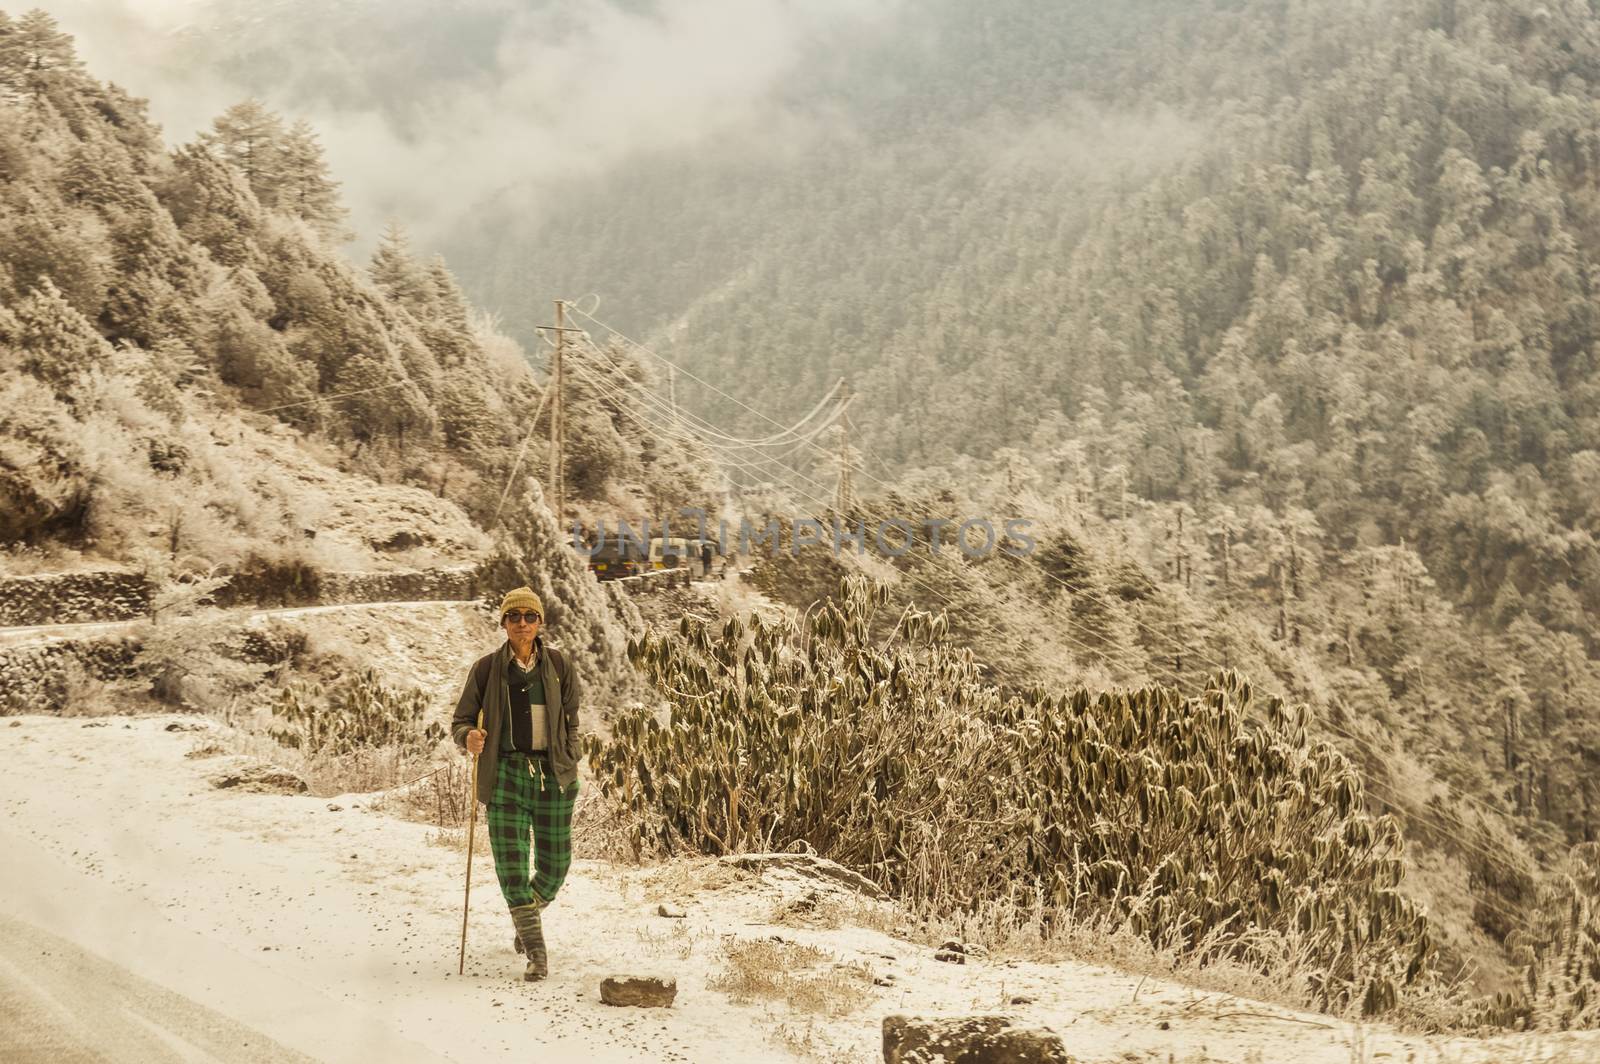 A Mature old (a man of Nepalese ethnicity) solitary hiker on a hiking trail walking alone in a beautiful winter environment of North east Himalayan Mountain range. Nepal, South Asia.